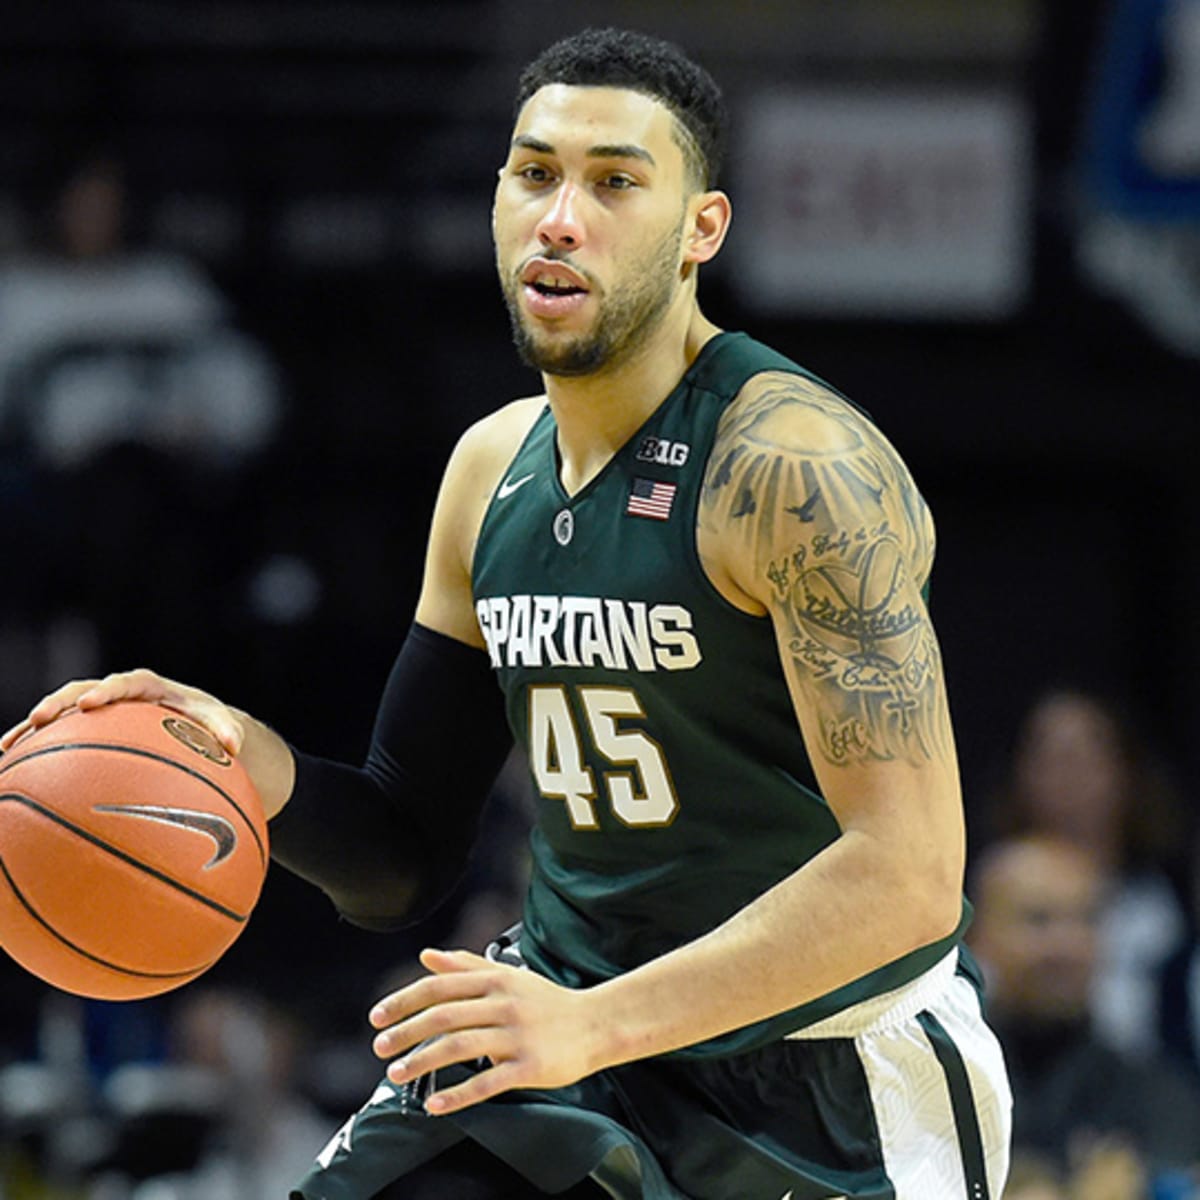 NABC names Valentine National Player of the Year, MSUToday